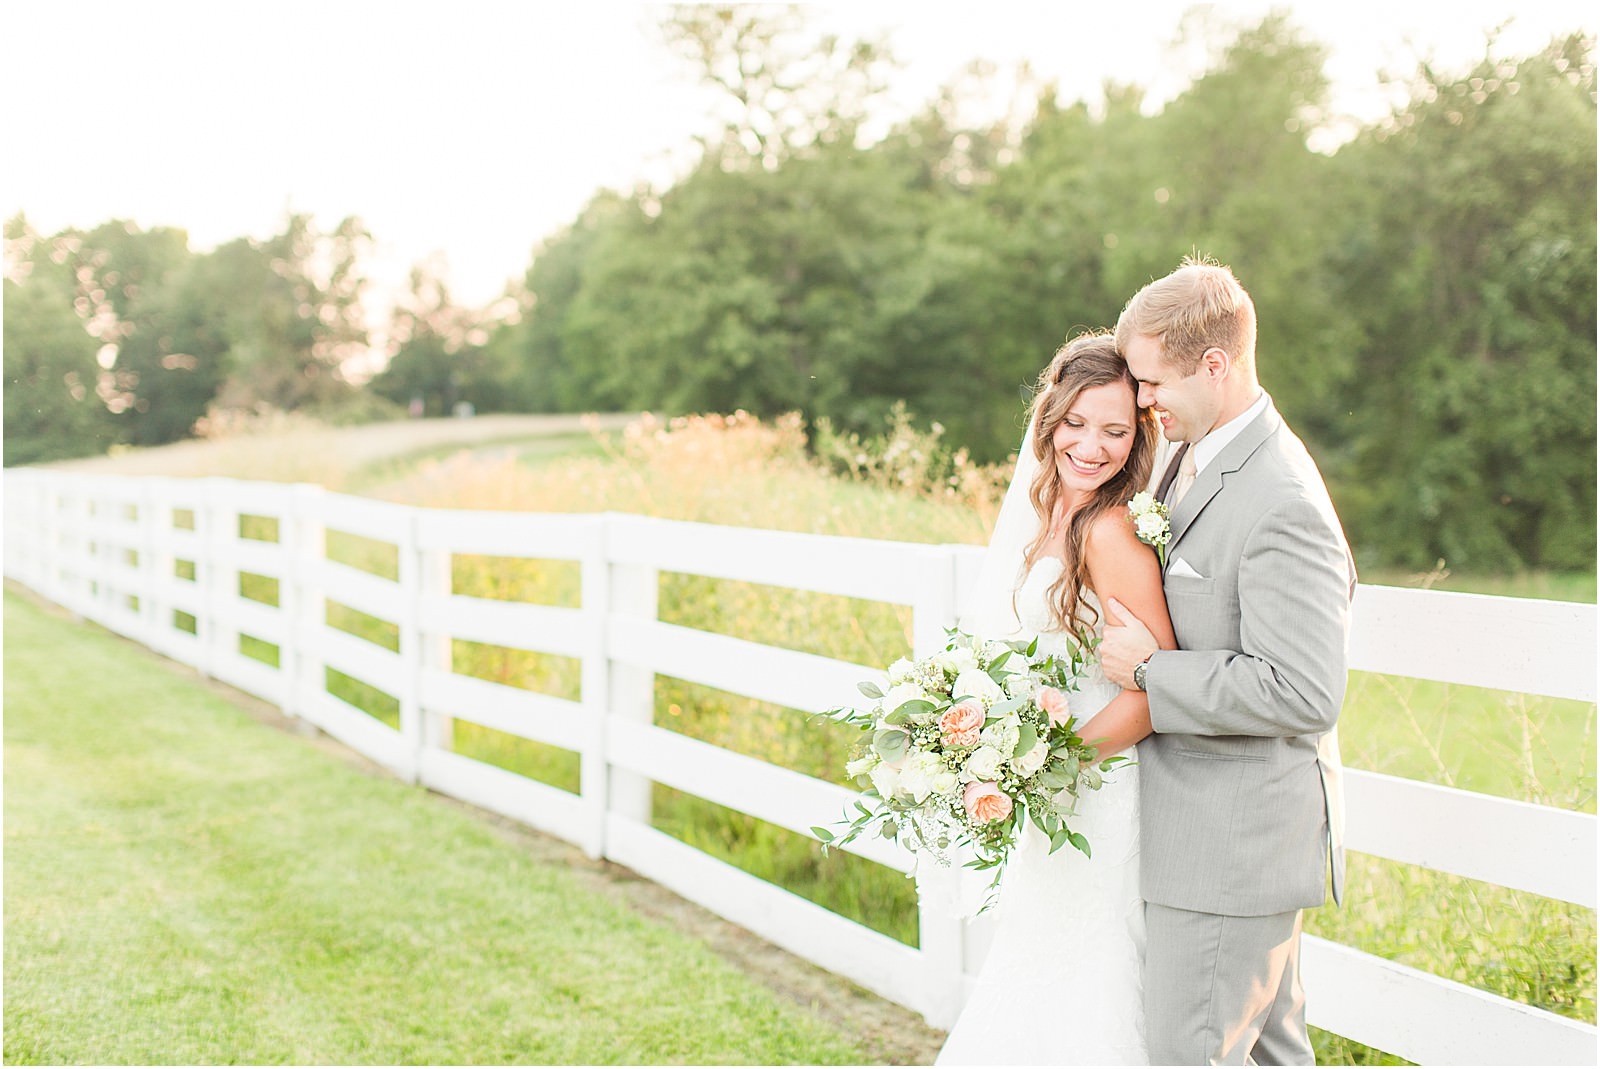 Stacey and Thomas | Blog106.jpg